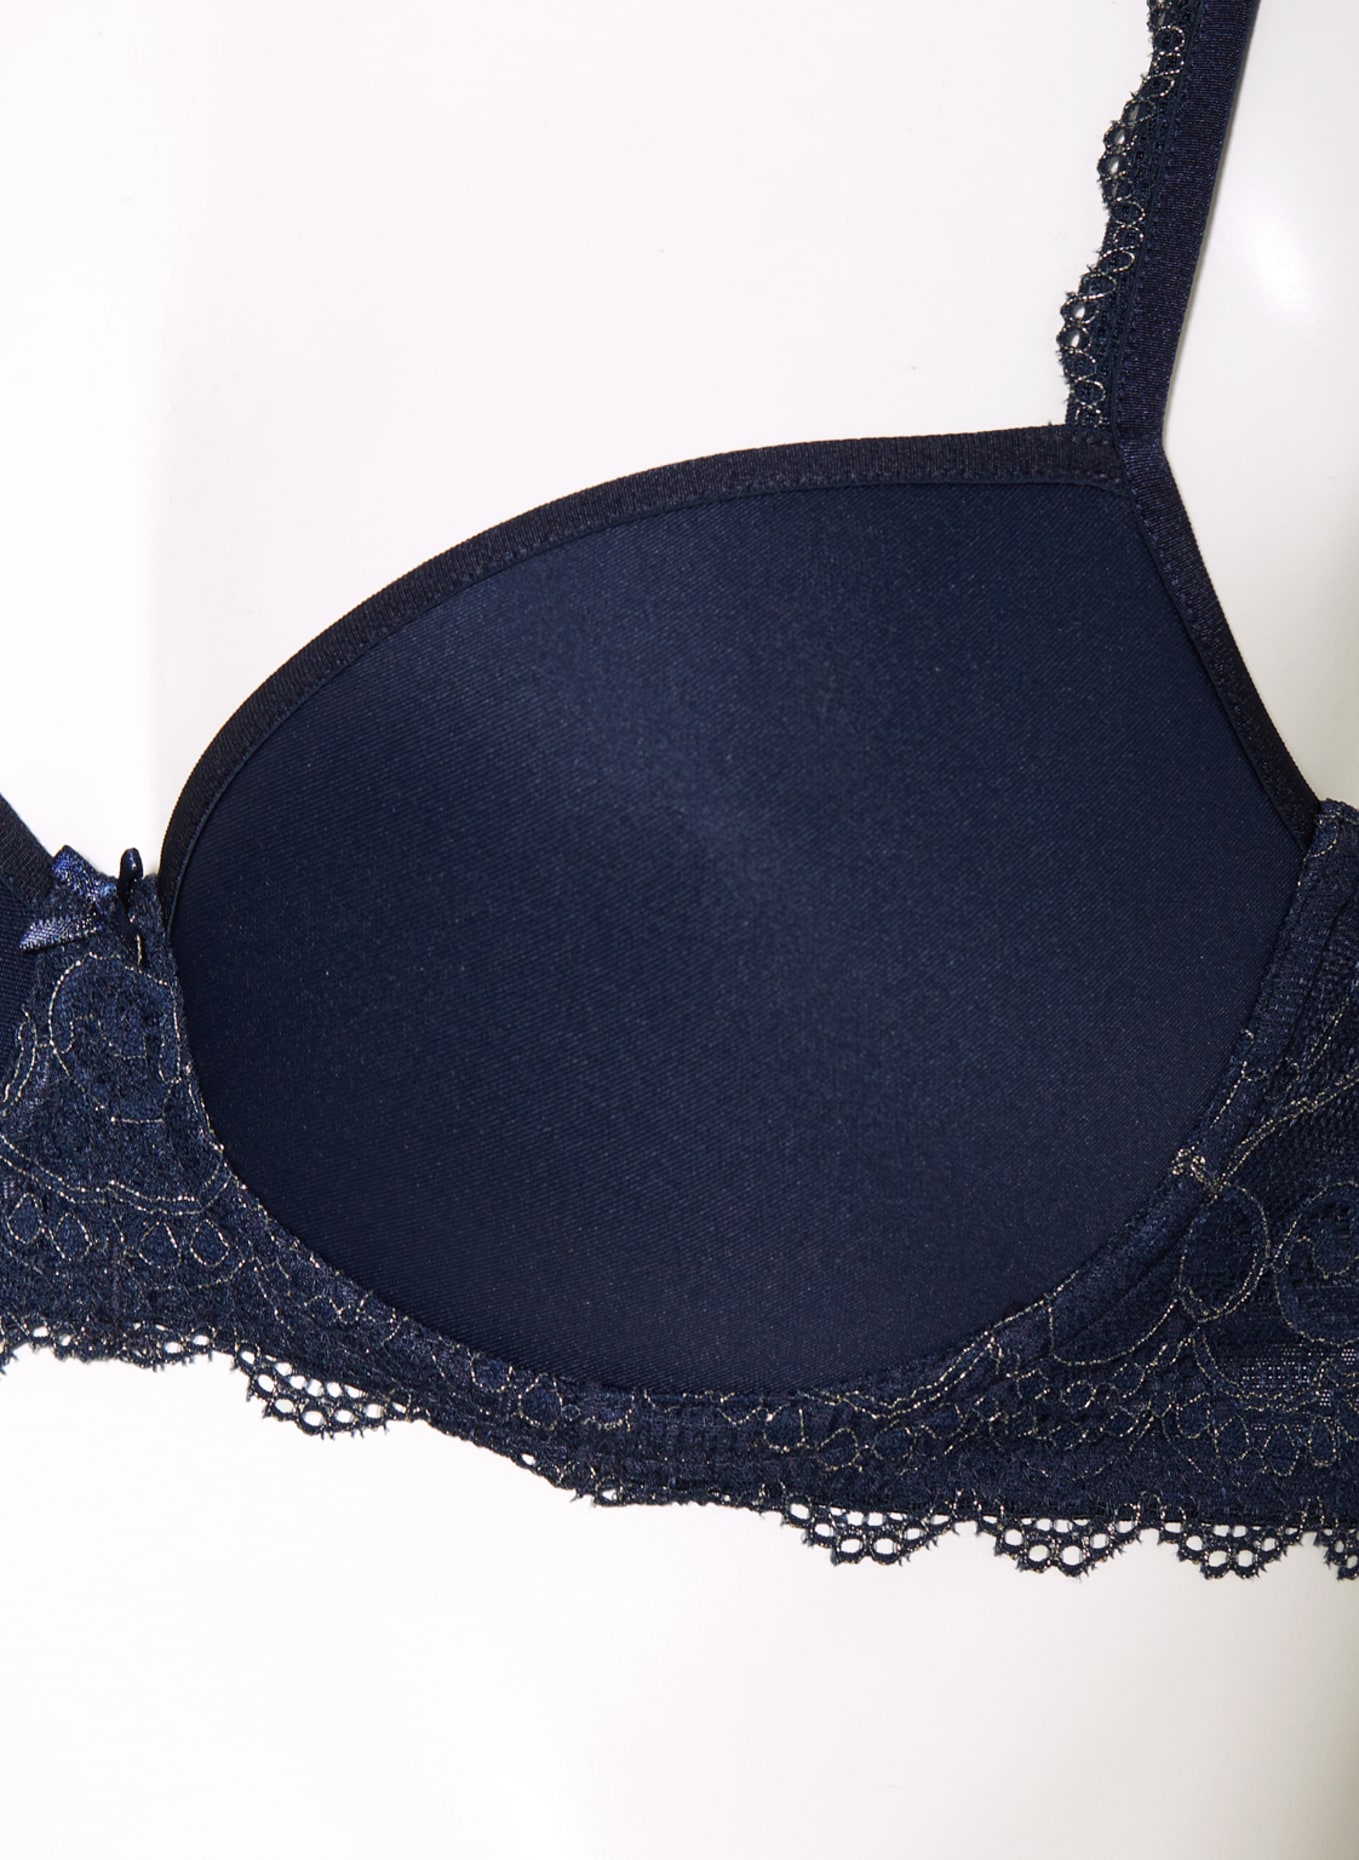 Serie Amorous Half Cup Spacer Bra by Mey